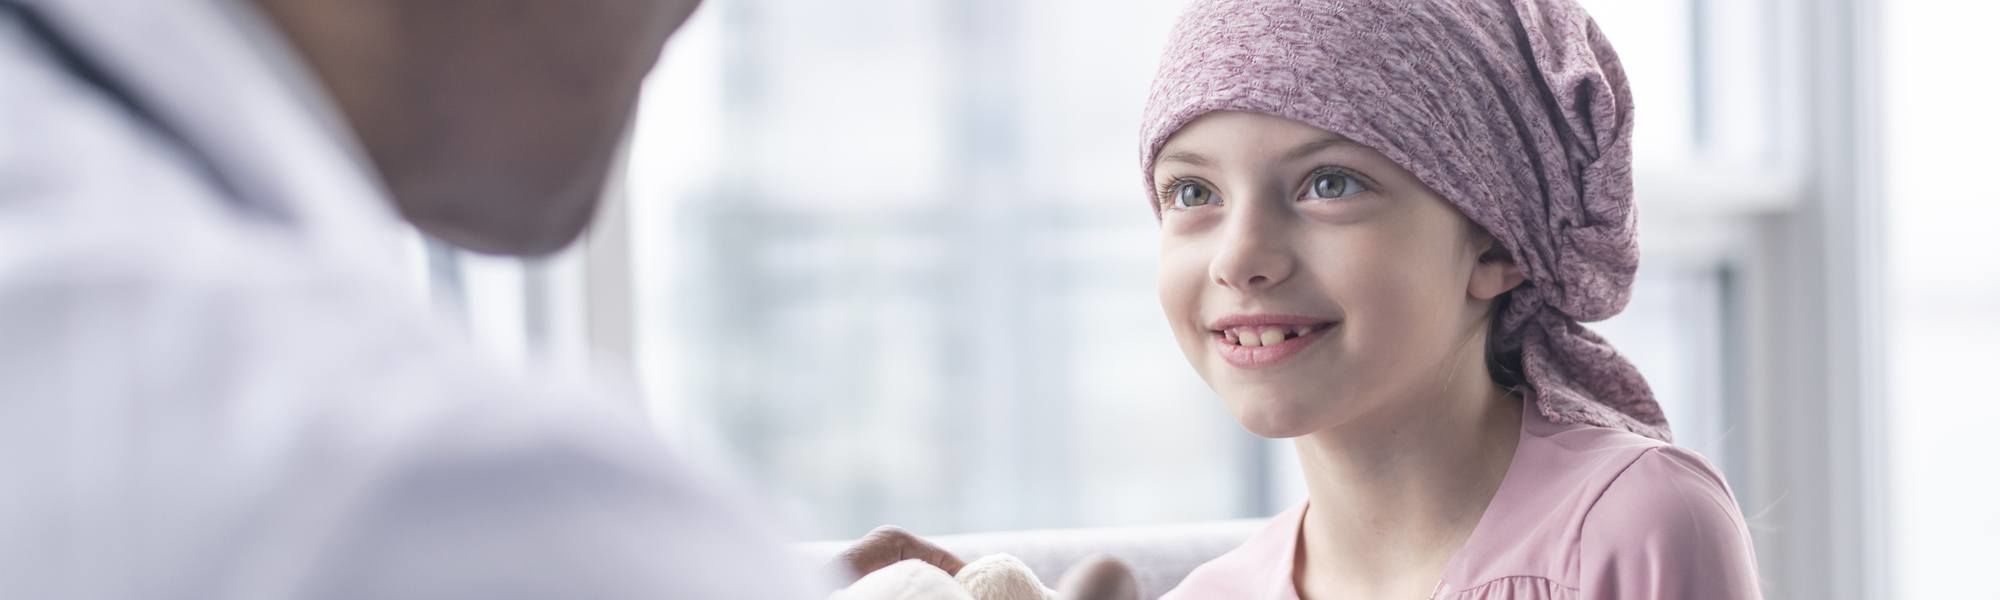 Courageous girl with cancer meets with doctor